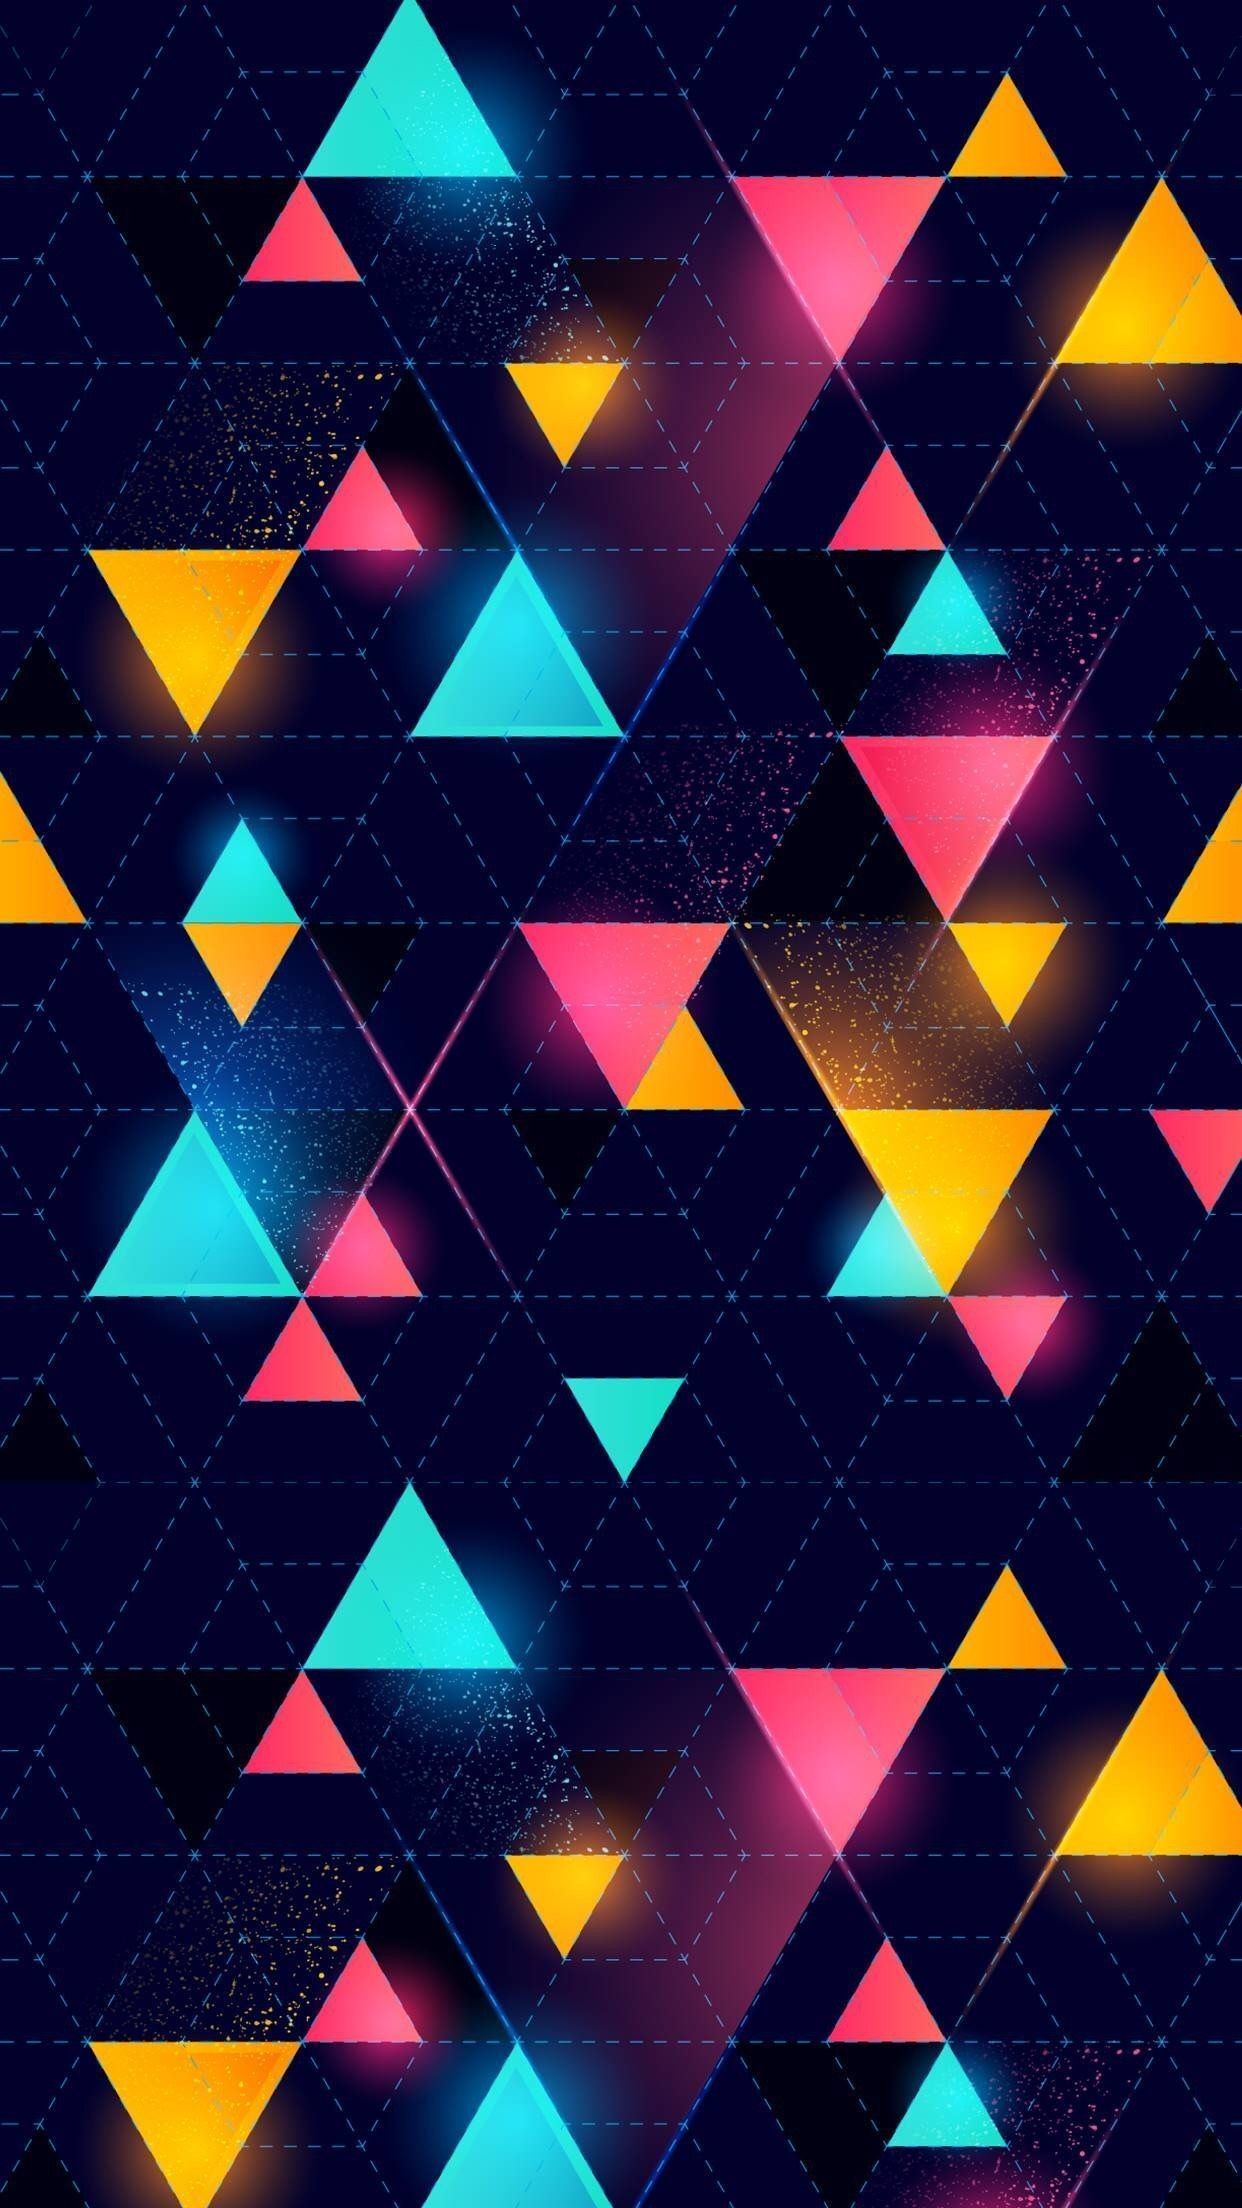 Geometric Abstract iPhone Wallpaper Free Geometric Abstract